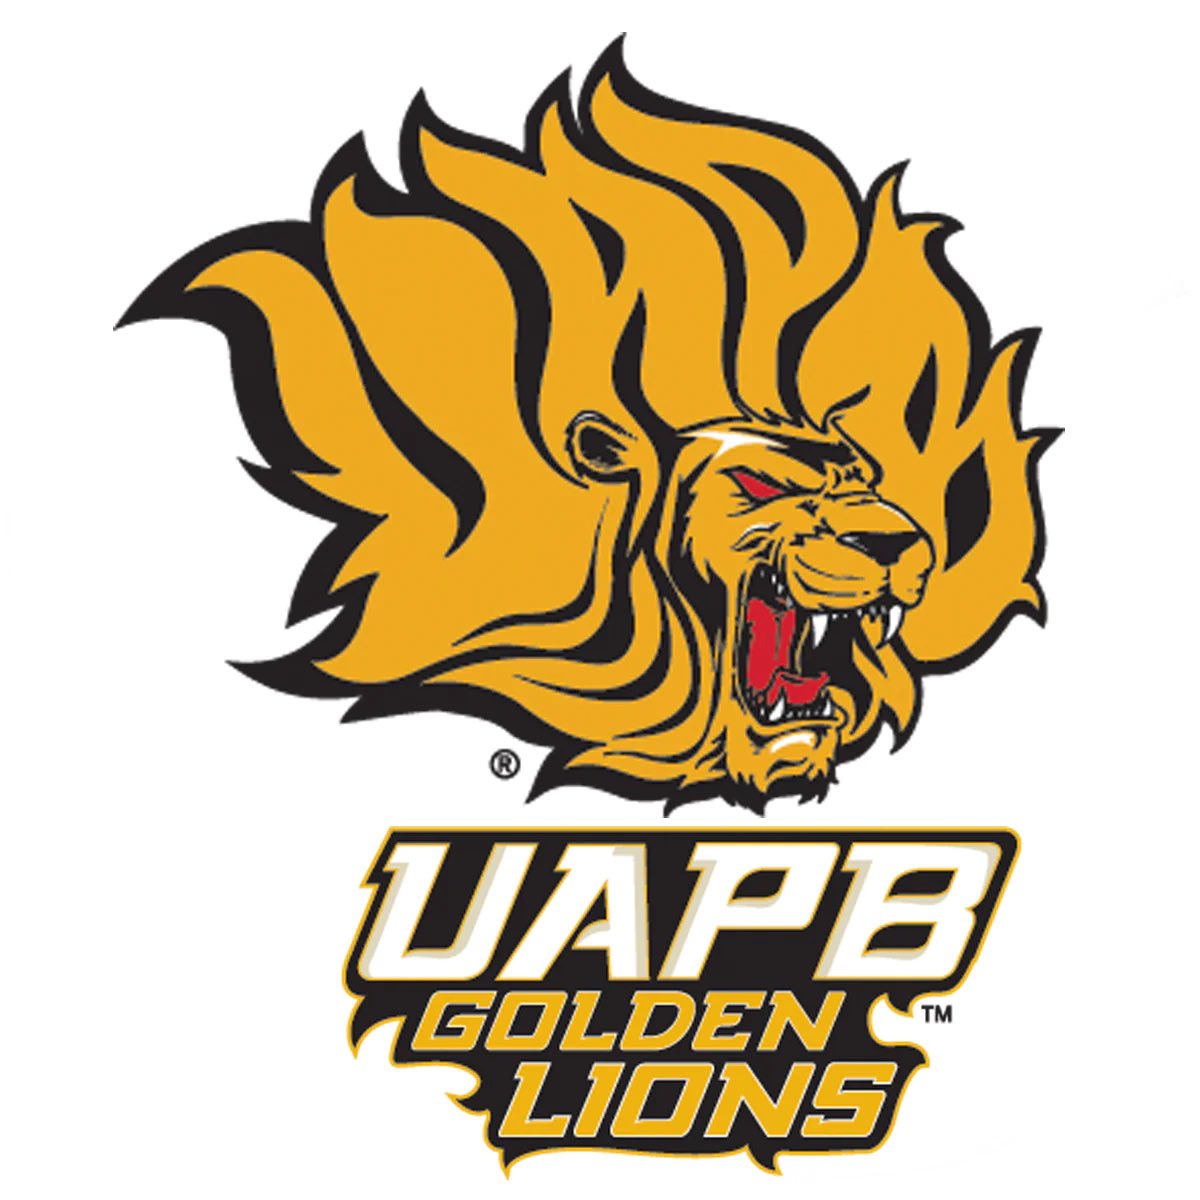 #AGTG After a great phone call with @Coach_Bahr, I am blessed to receive my first D1 offer from University of Arkansas Pine Bluff!🦁 @CoachAHampton @ThankfulCoach @TheChrisRubio @Lmacc21 @finchmachine